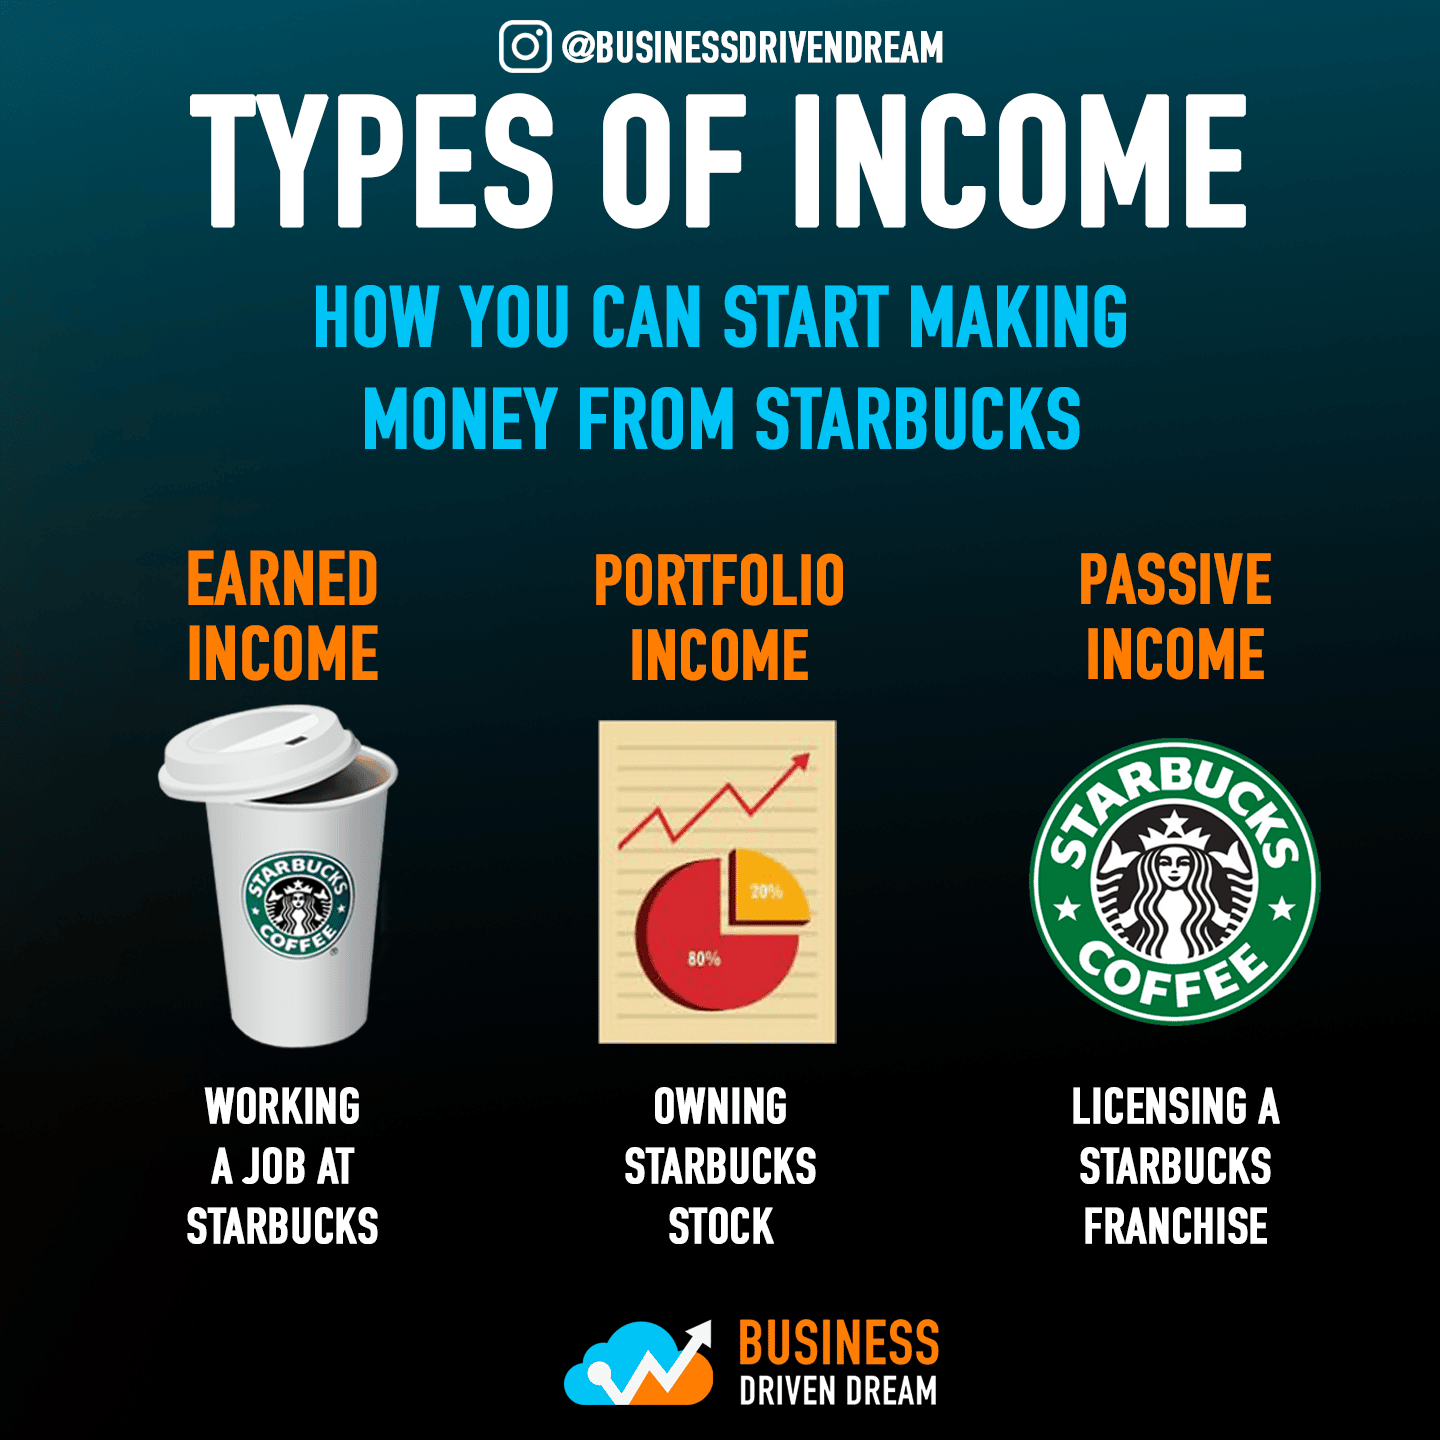 Three basic types of income that you can earn from starbucks. Earned ...